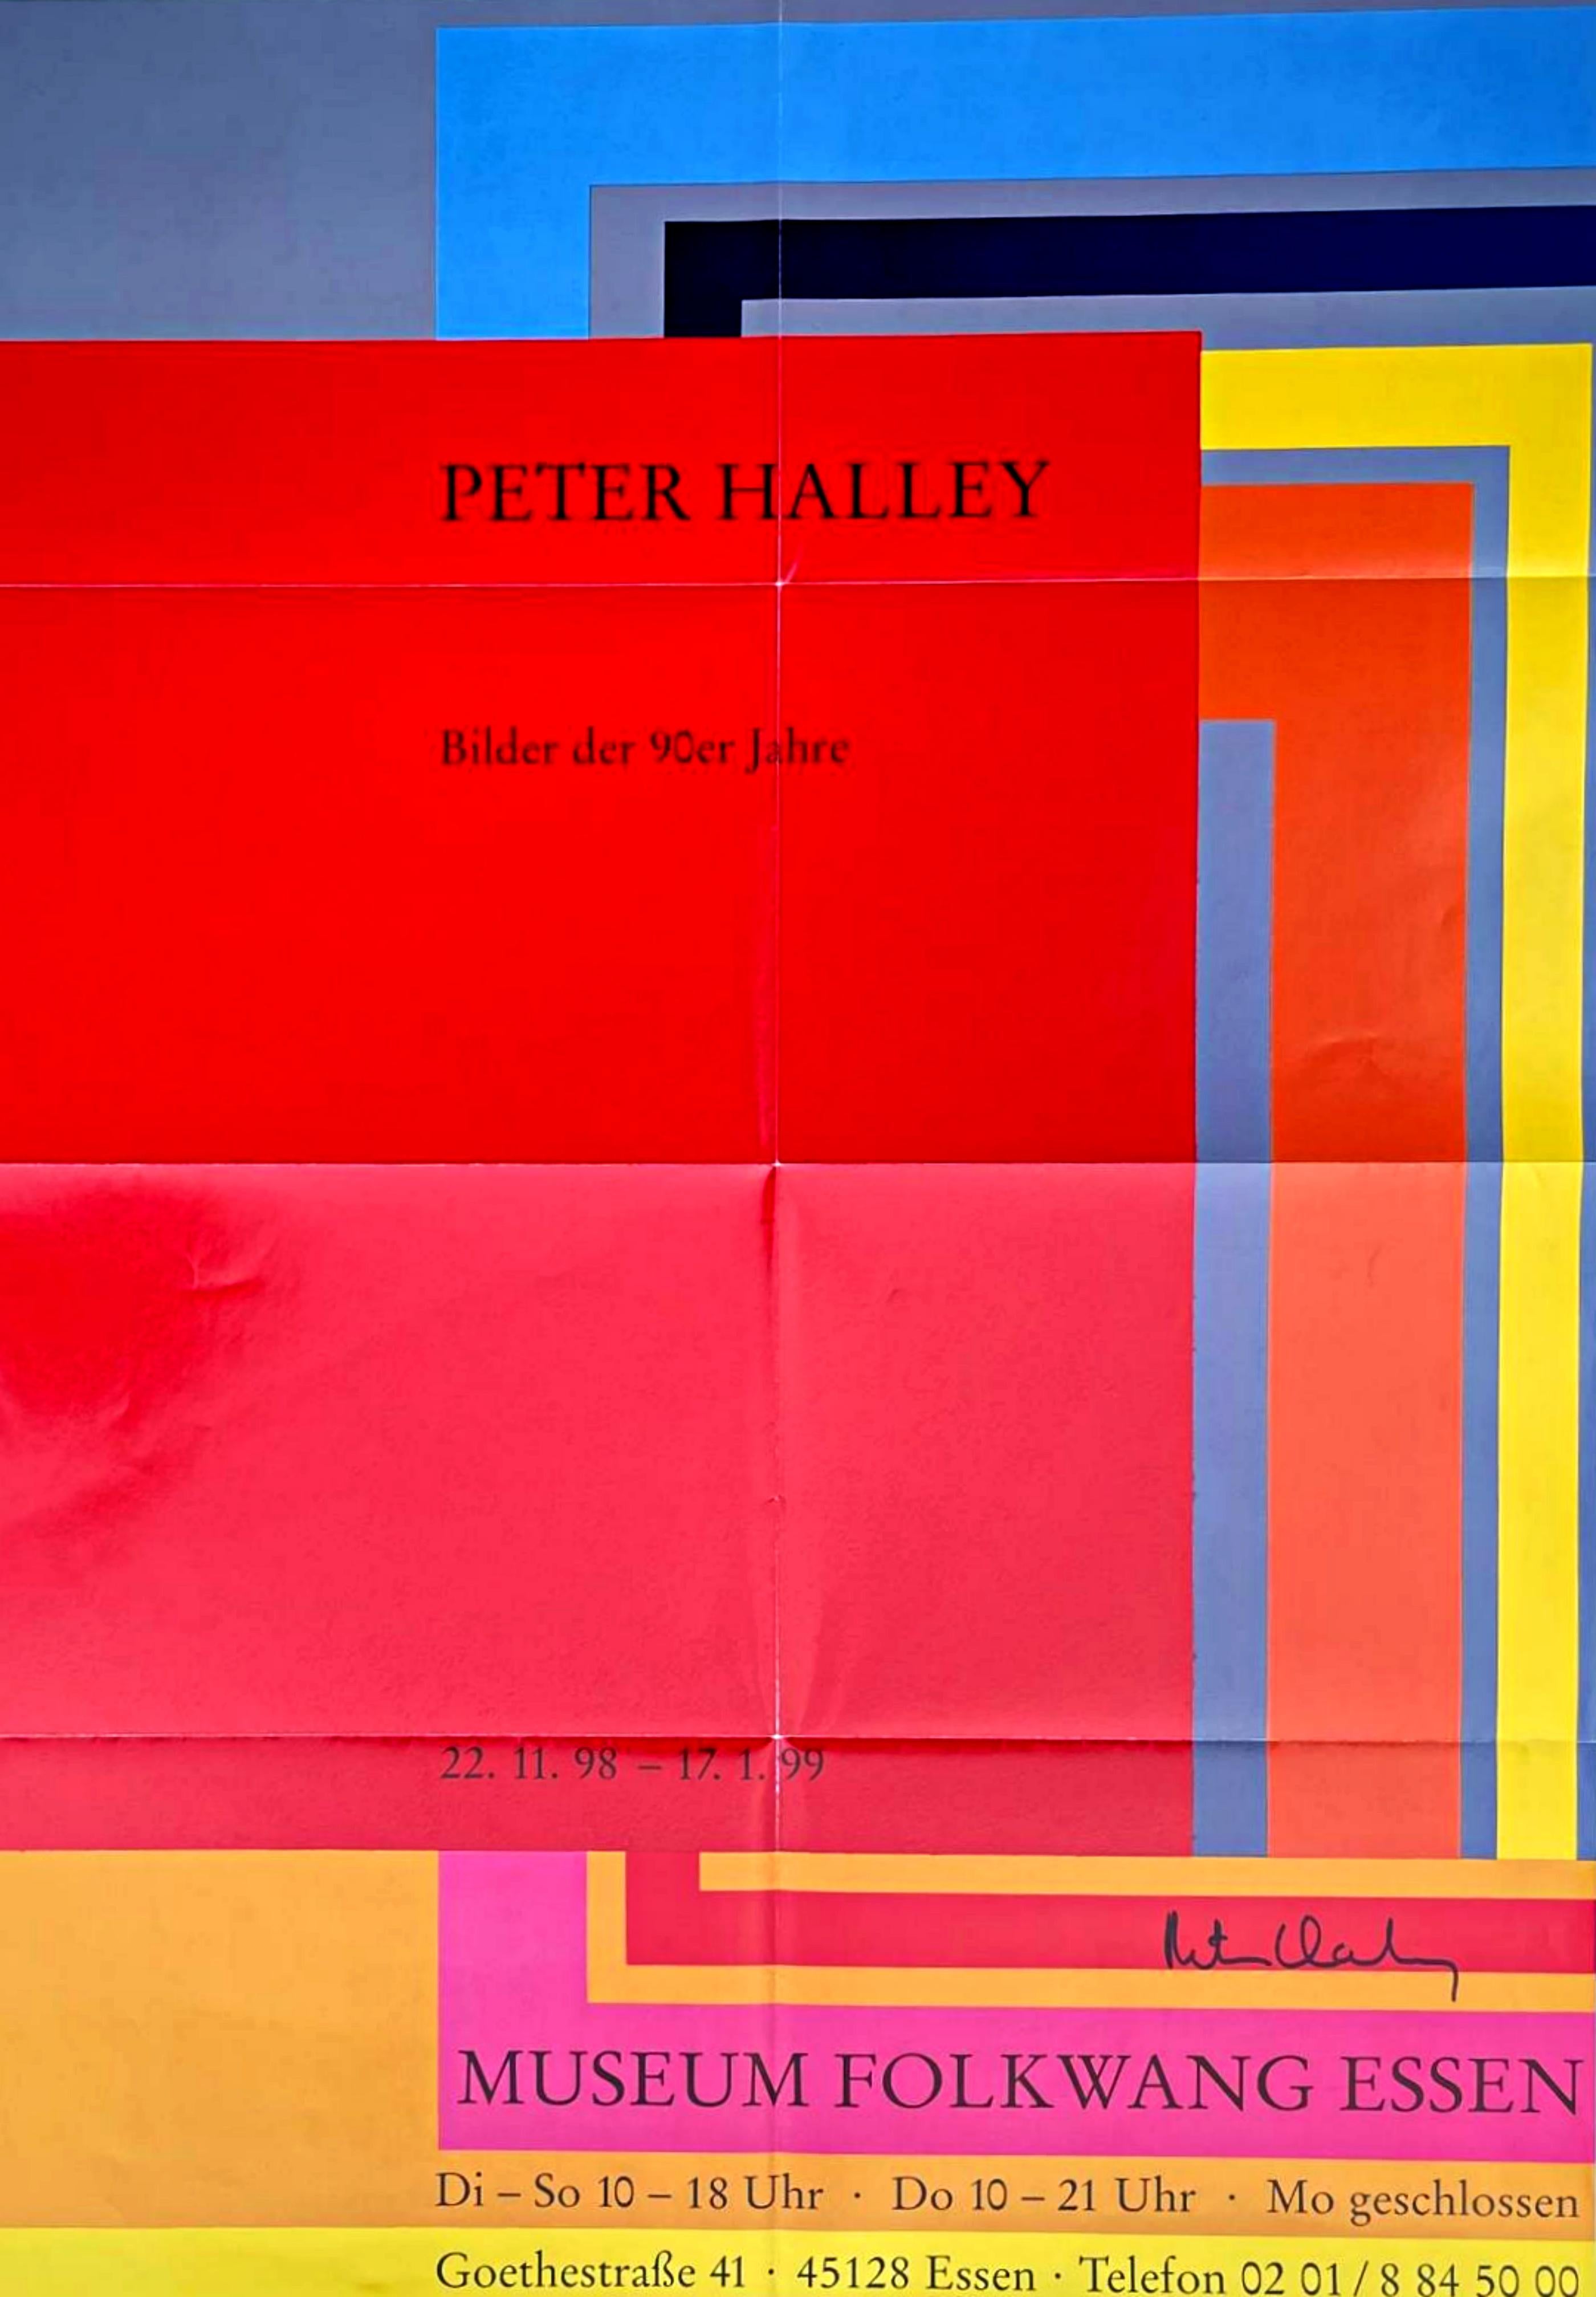 Peter Halley
Museum of Folkwang, Essen, Germany (Hand Signed by Peter Halley), 1998
Offset lithograph poster (hand signed by Peter Halley)
33 × 24 inches
Unframed
Alpha 137 Gallery is honored to offer this historic offset lithograph of legendary